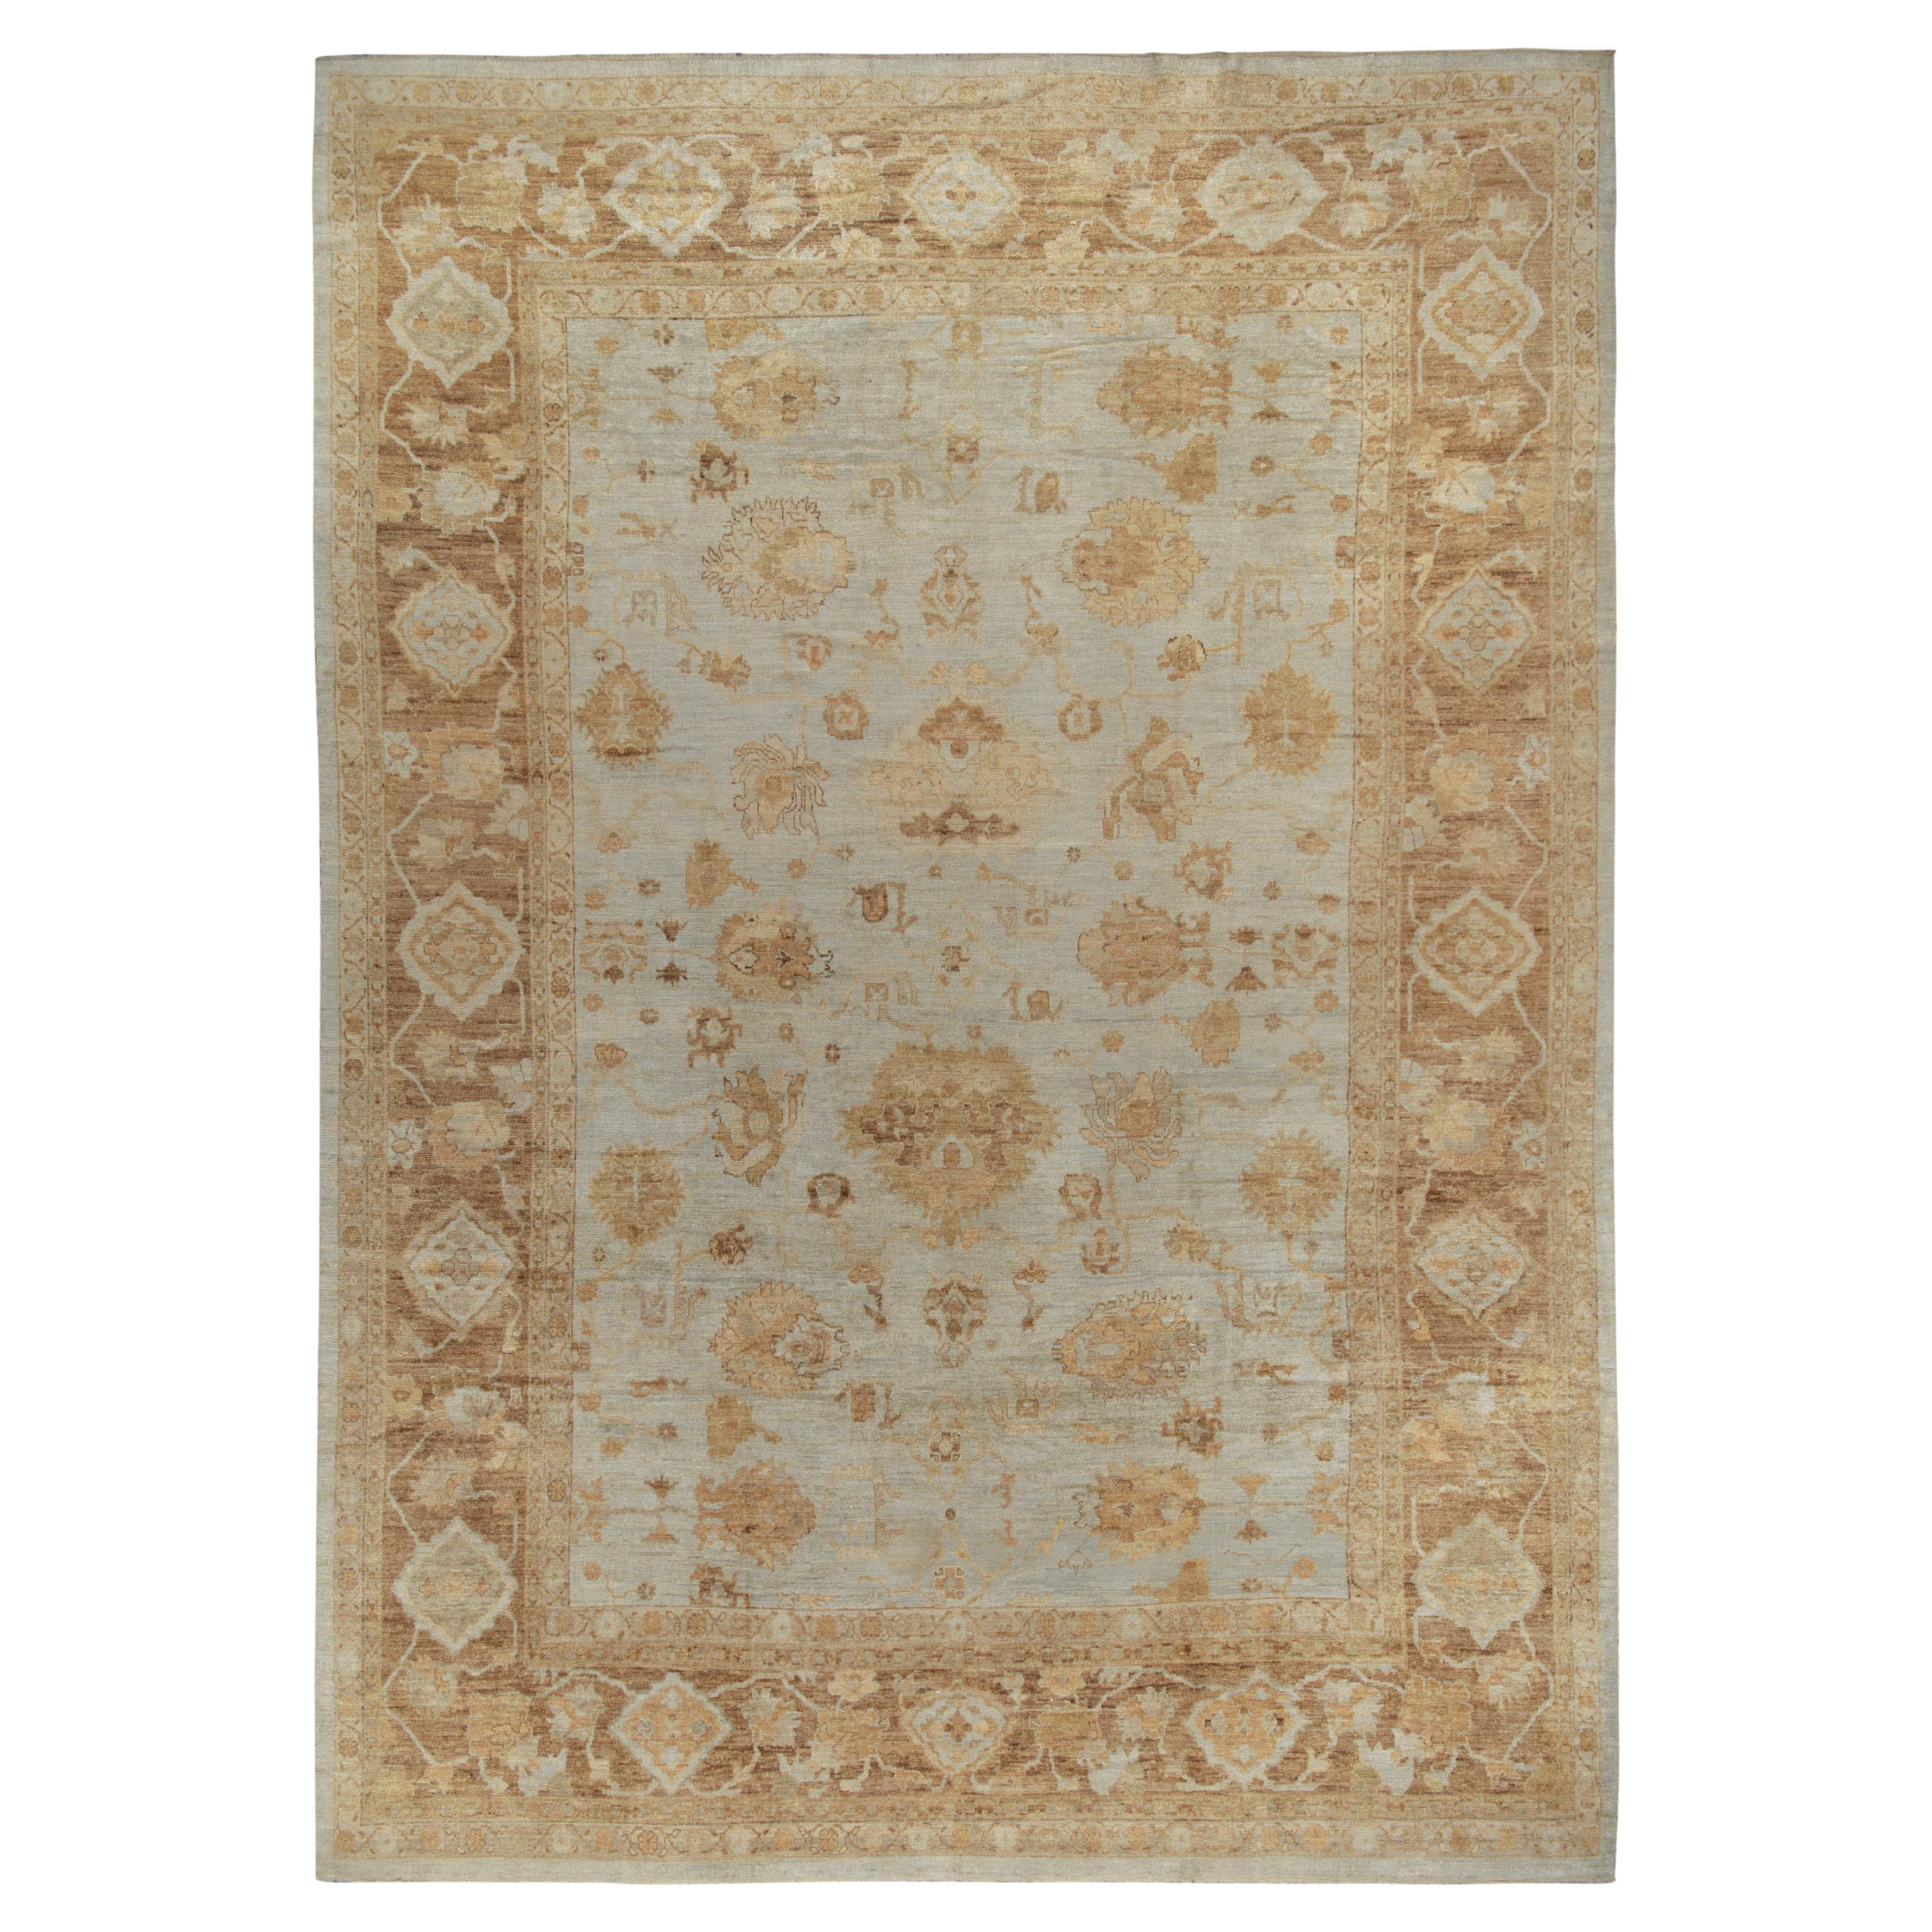 Rug & Kilim's Contemporary Oushak Rug in All over Blue, Beige Floral Pattern